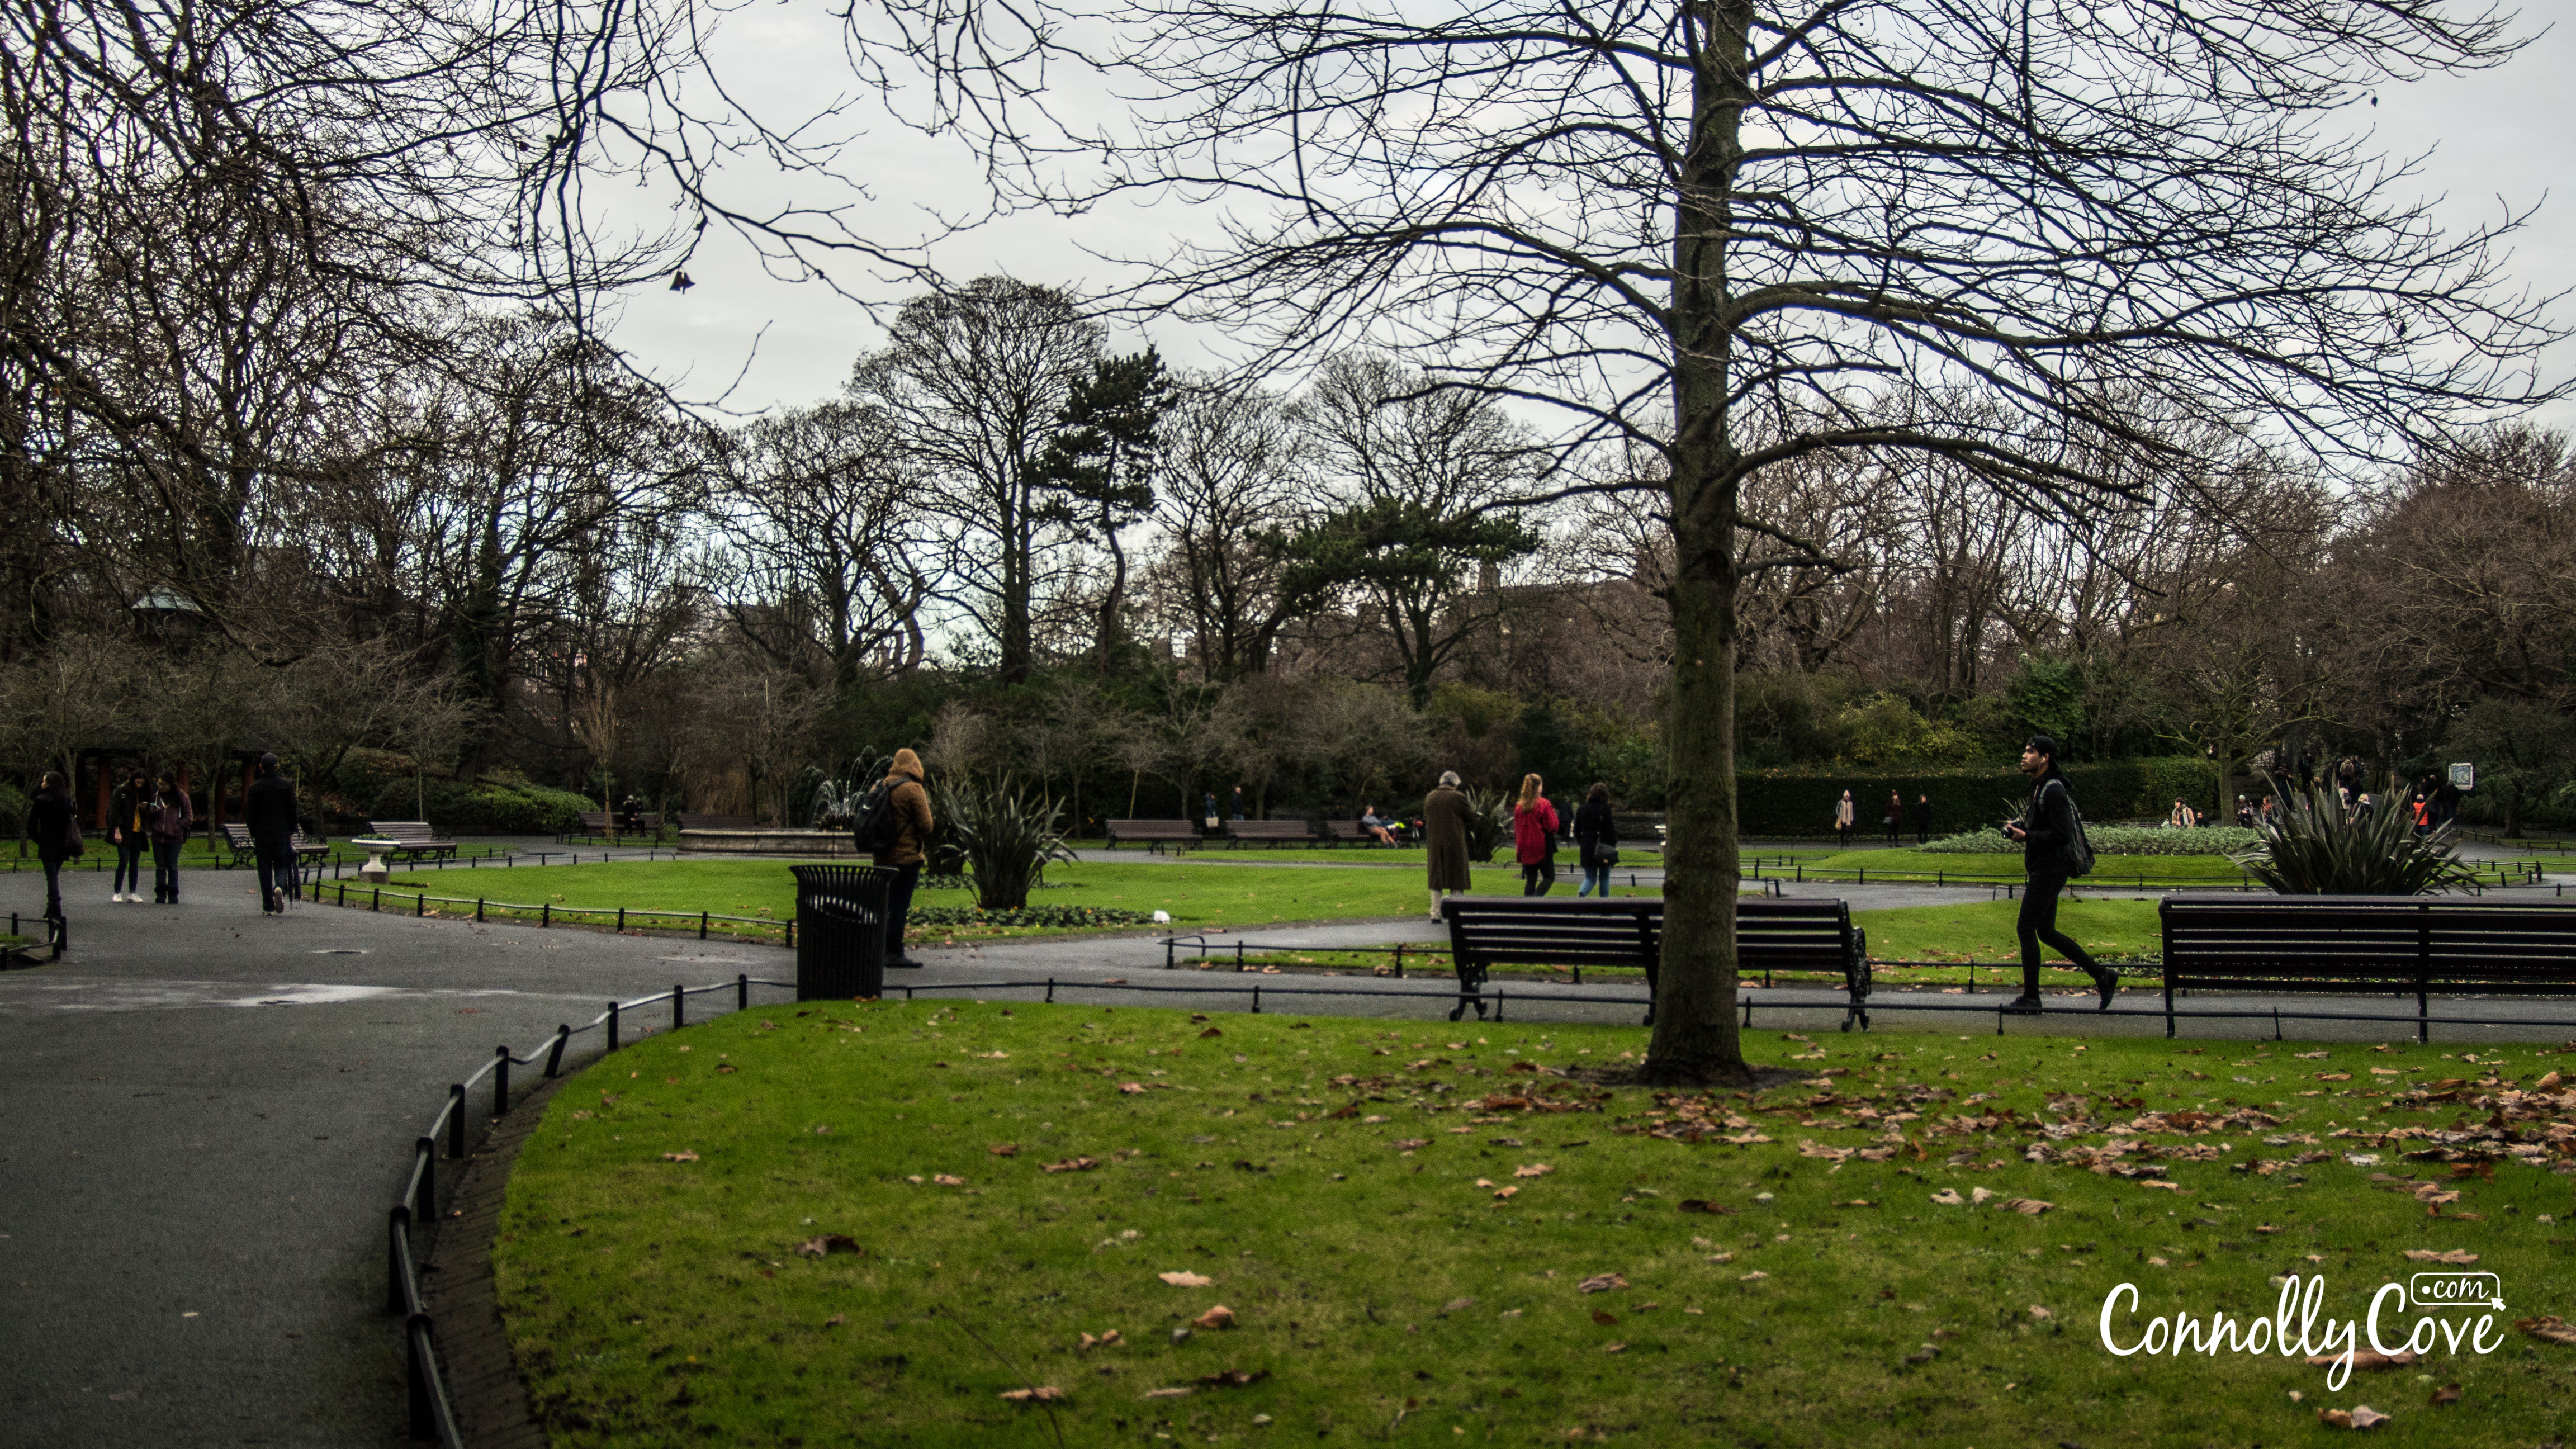 Stephens green dublin 2 St. Stephen's Green is a large historic public park in the City Centre of Dublin, Ireland. The park was originally opened in 1880 by Lord Ardiluan. The current landscape of St. Stephen's Green was designed by William Sheppard. The park has been maintained to its original Victorian layout with extensive perimeter trees and shrub planting along with Spring and Summer Victorian bedding.